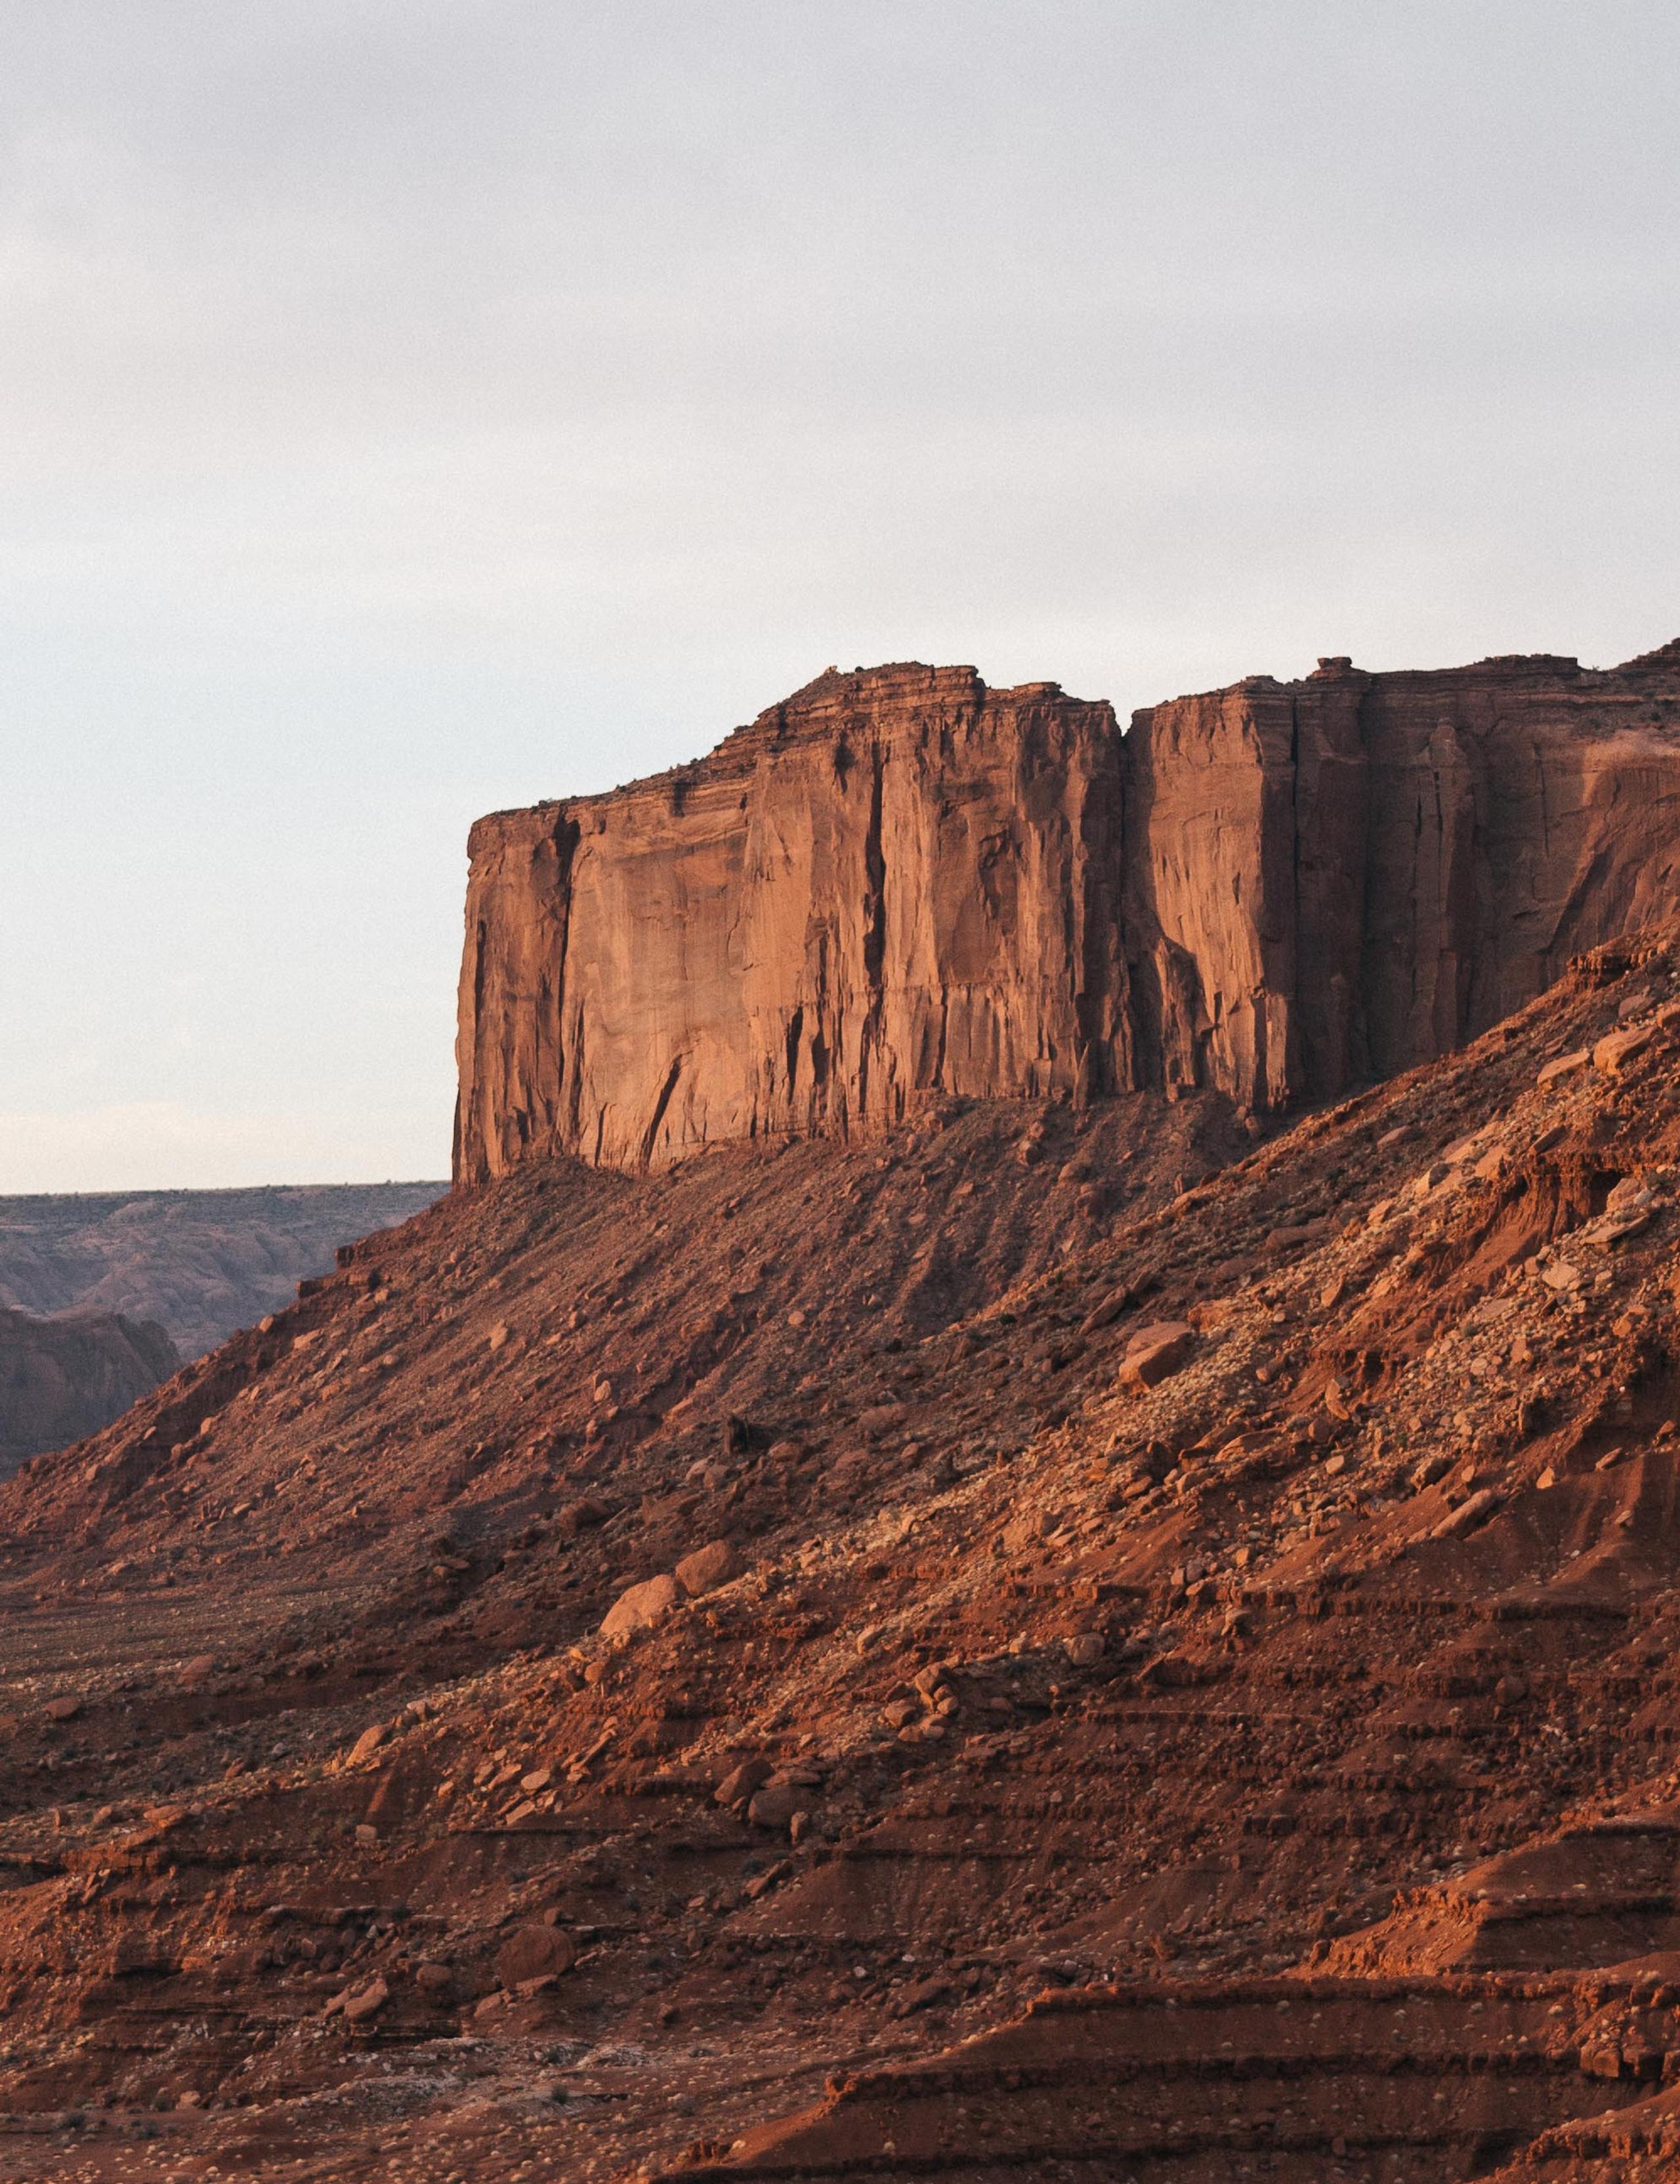 Landscape of tall mountains in Monument Valley